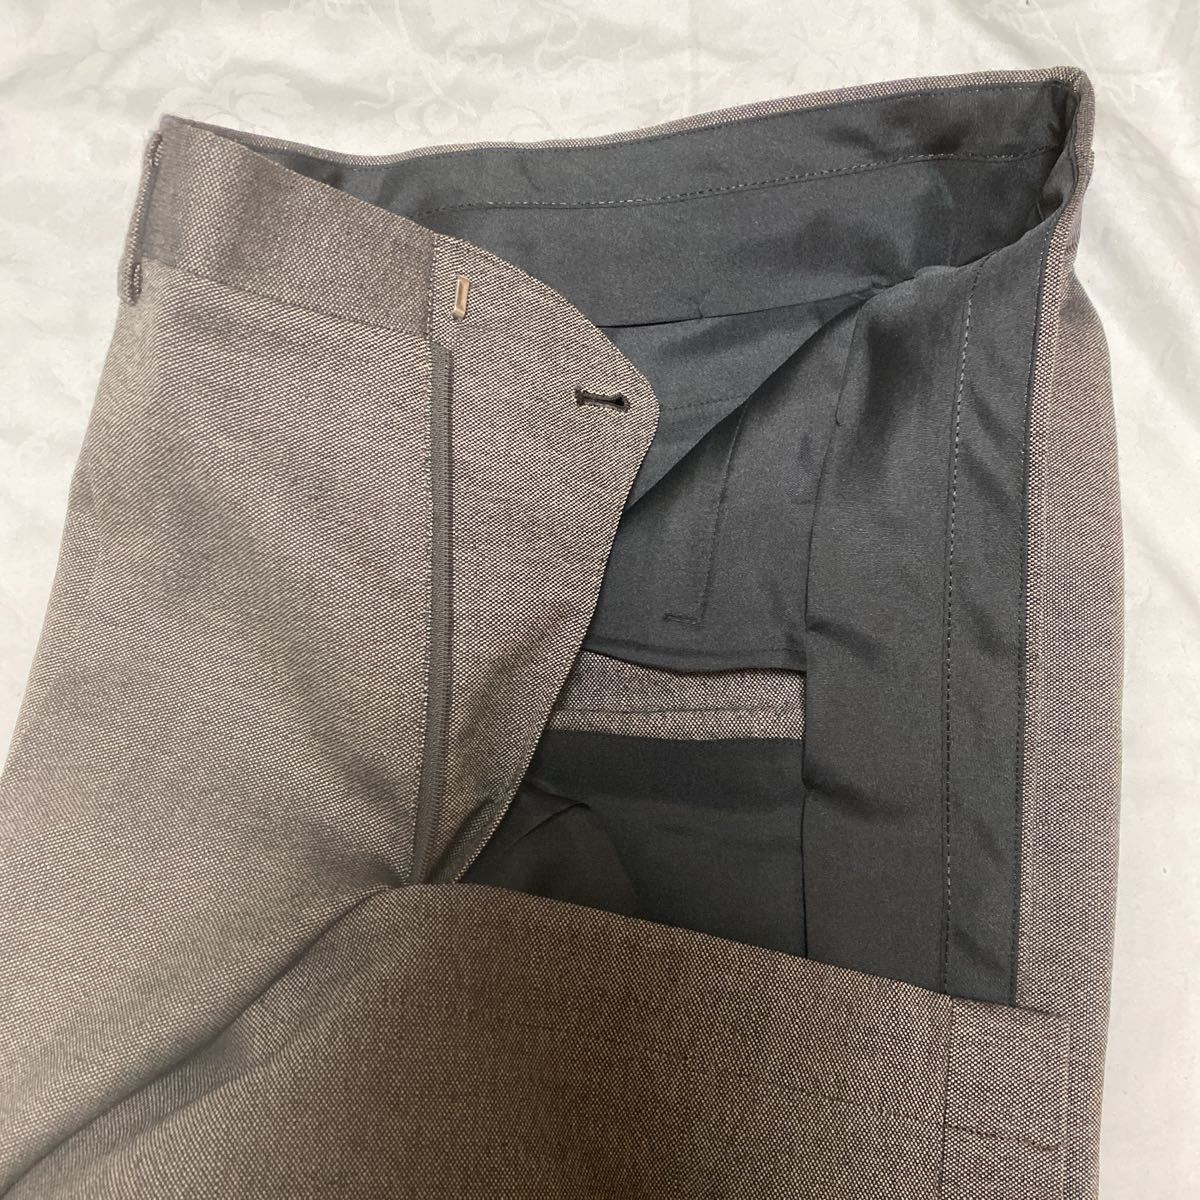  new goods unused super-discount tag attaching wool 95% high class single suit top and bottom setup size AB5daf gray side Benz moist cloth 